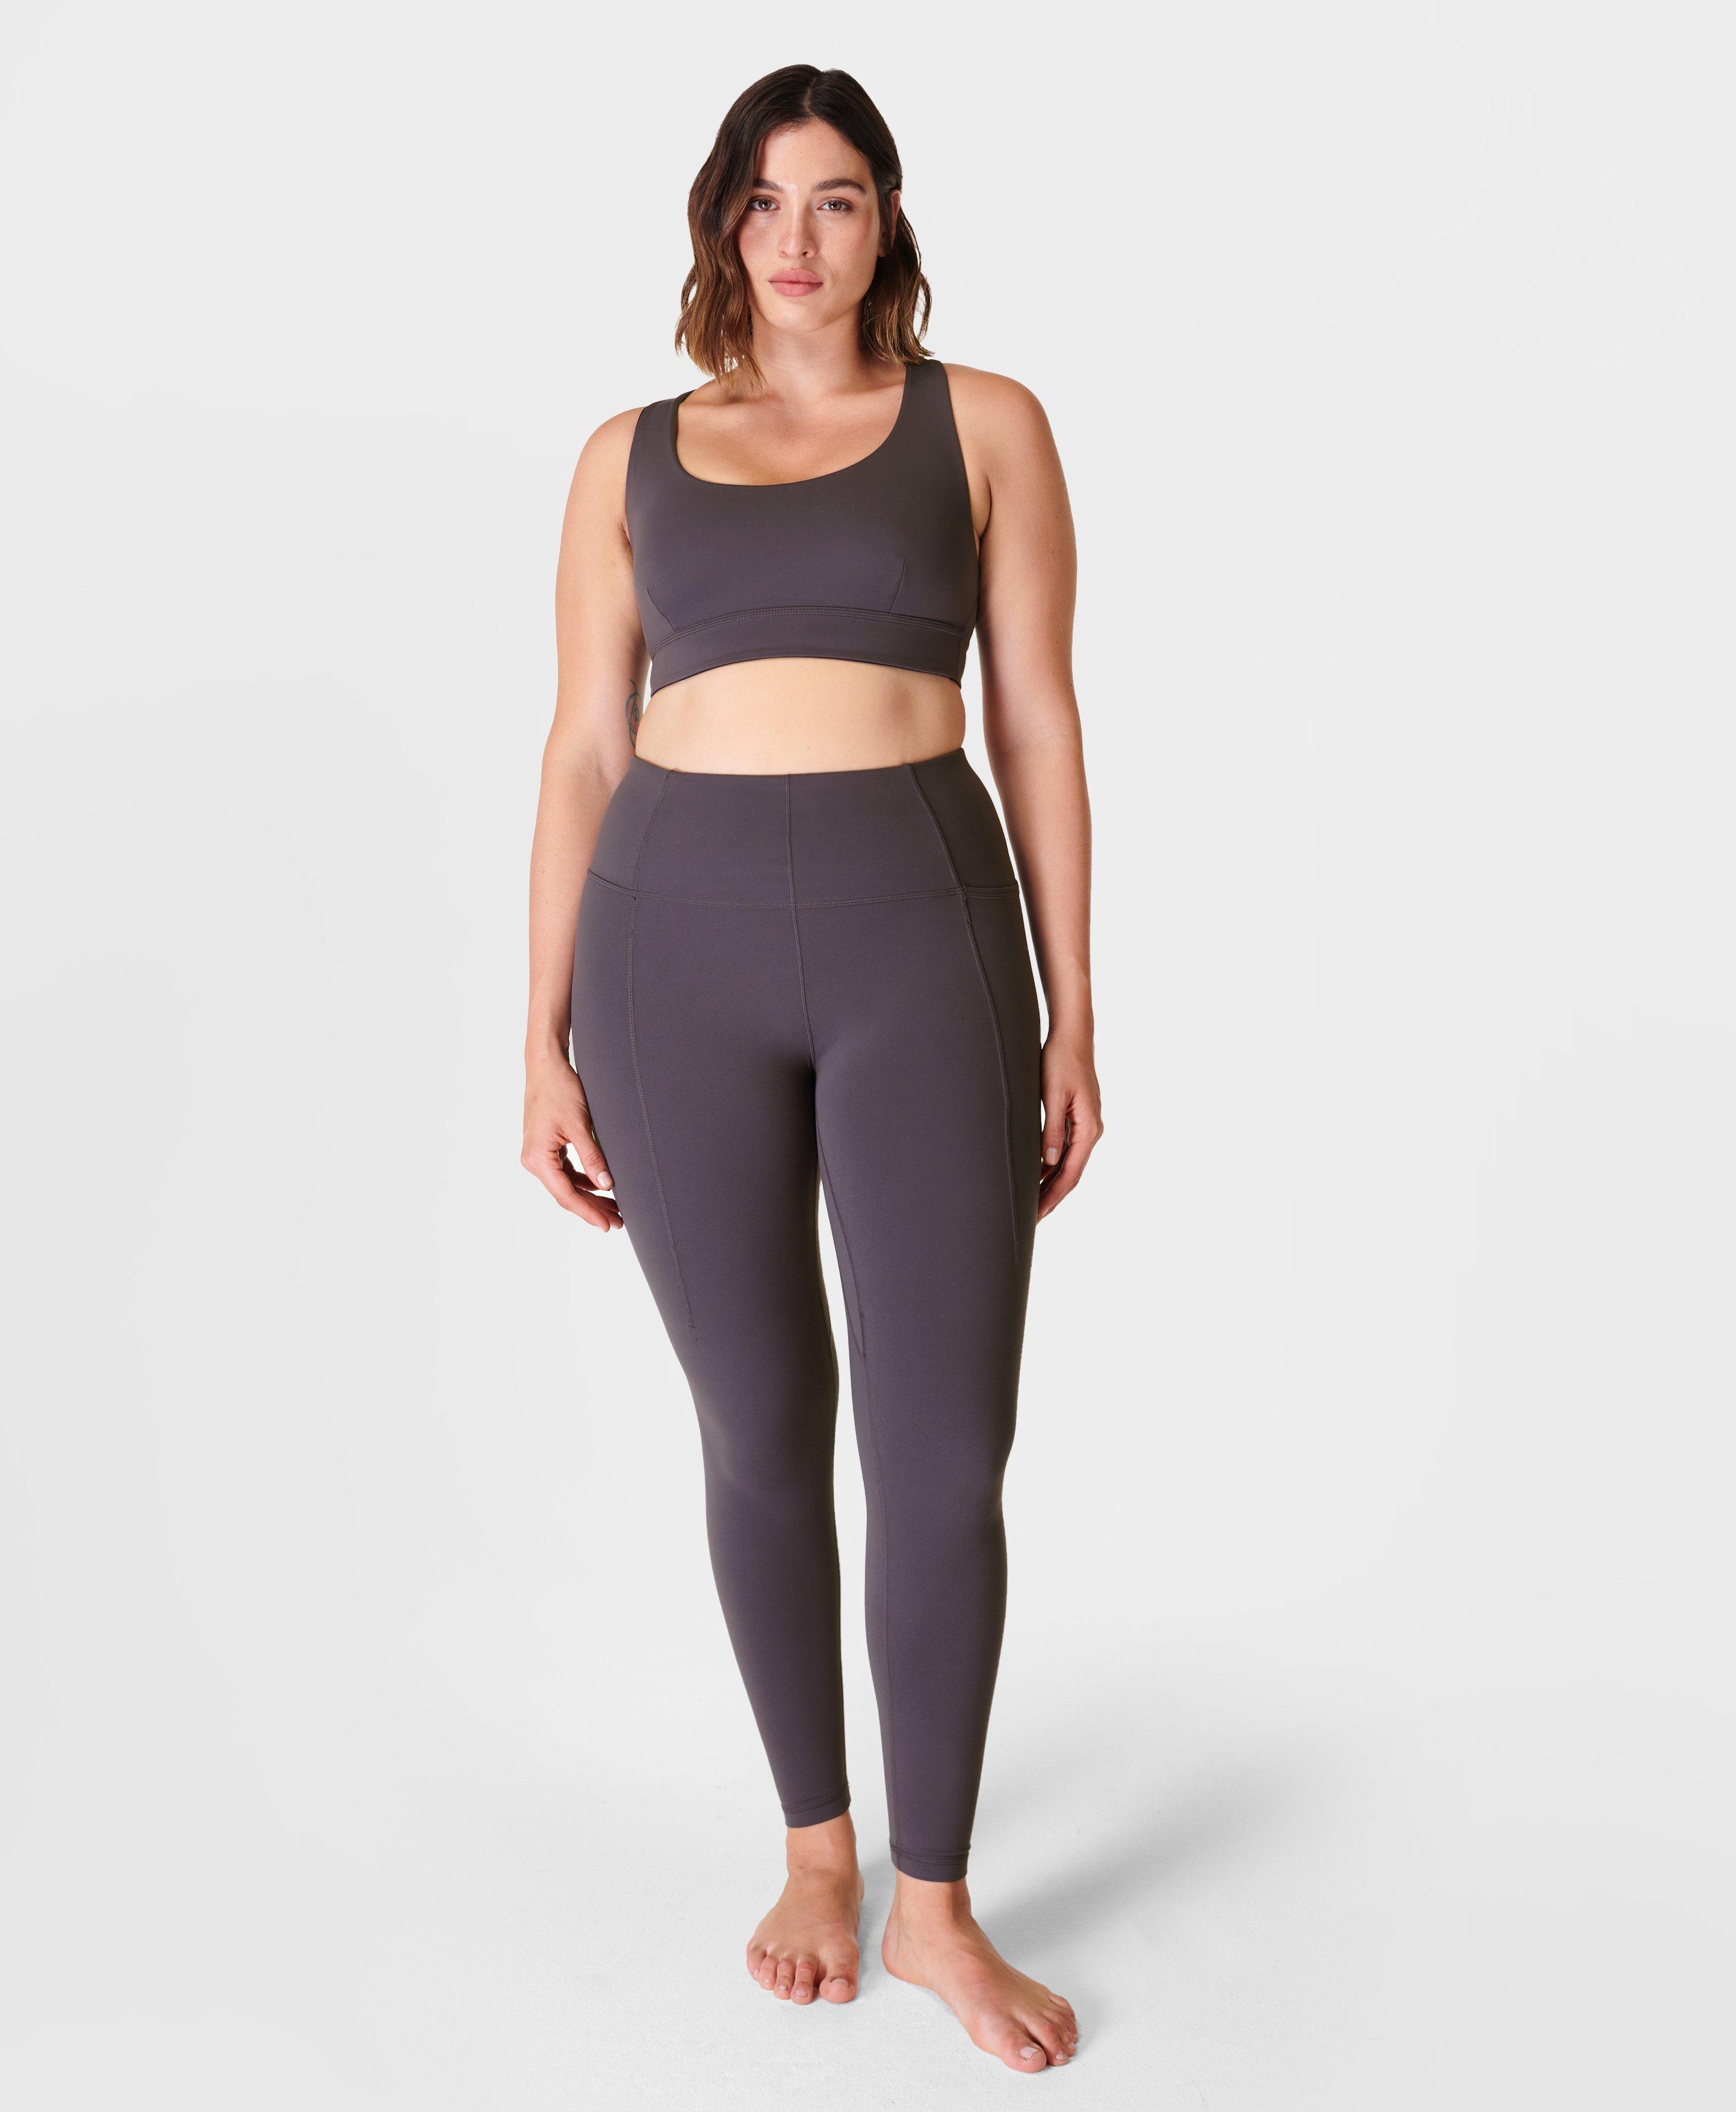 Yogalicious Sports Bra Gray Size M - $11 (35% Off Retail) - From Brianna